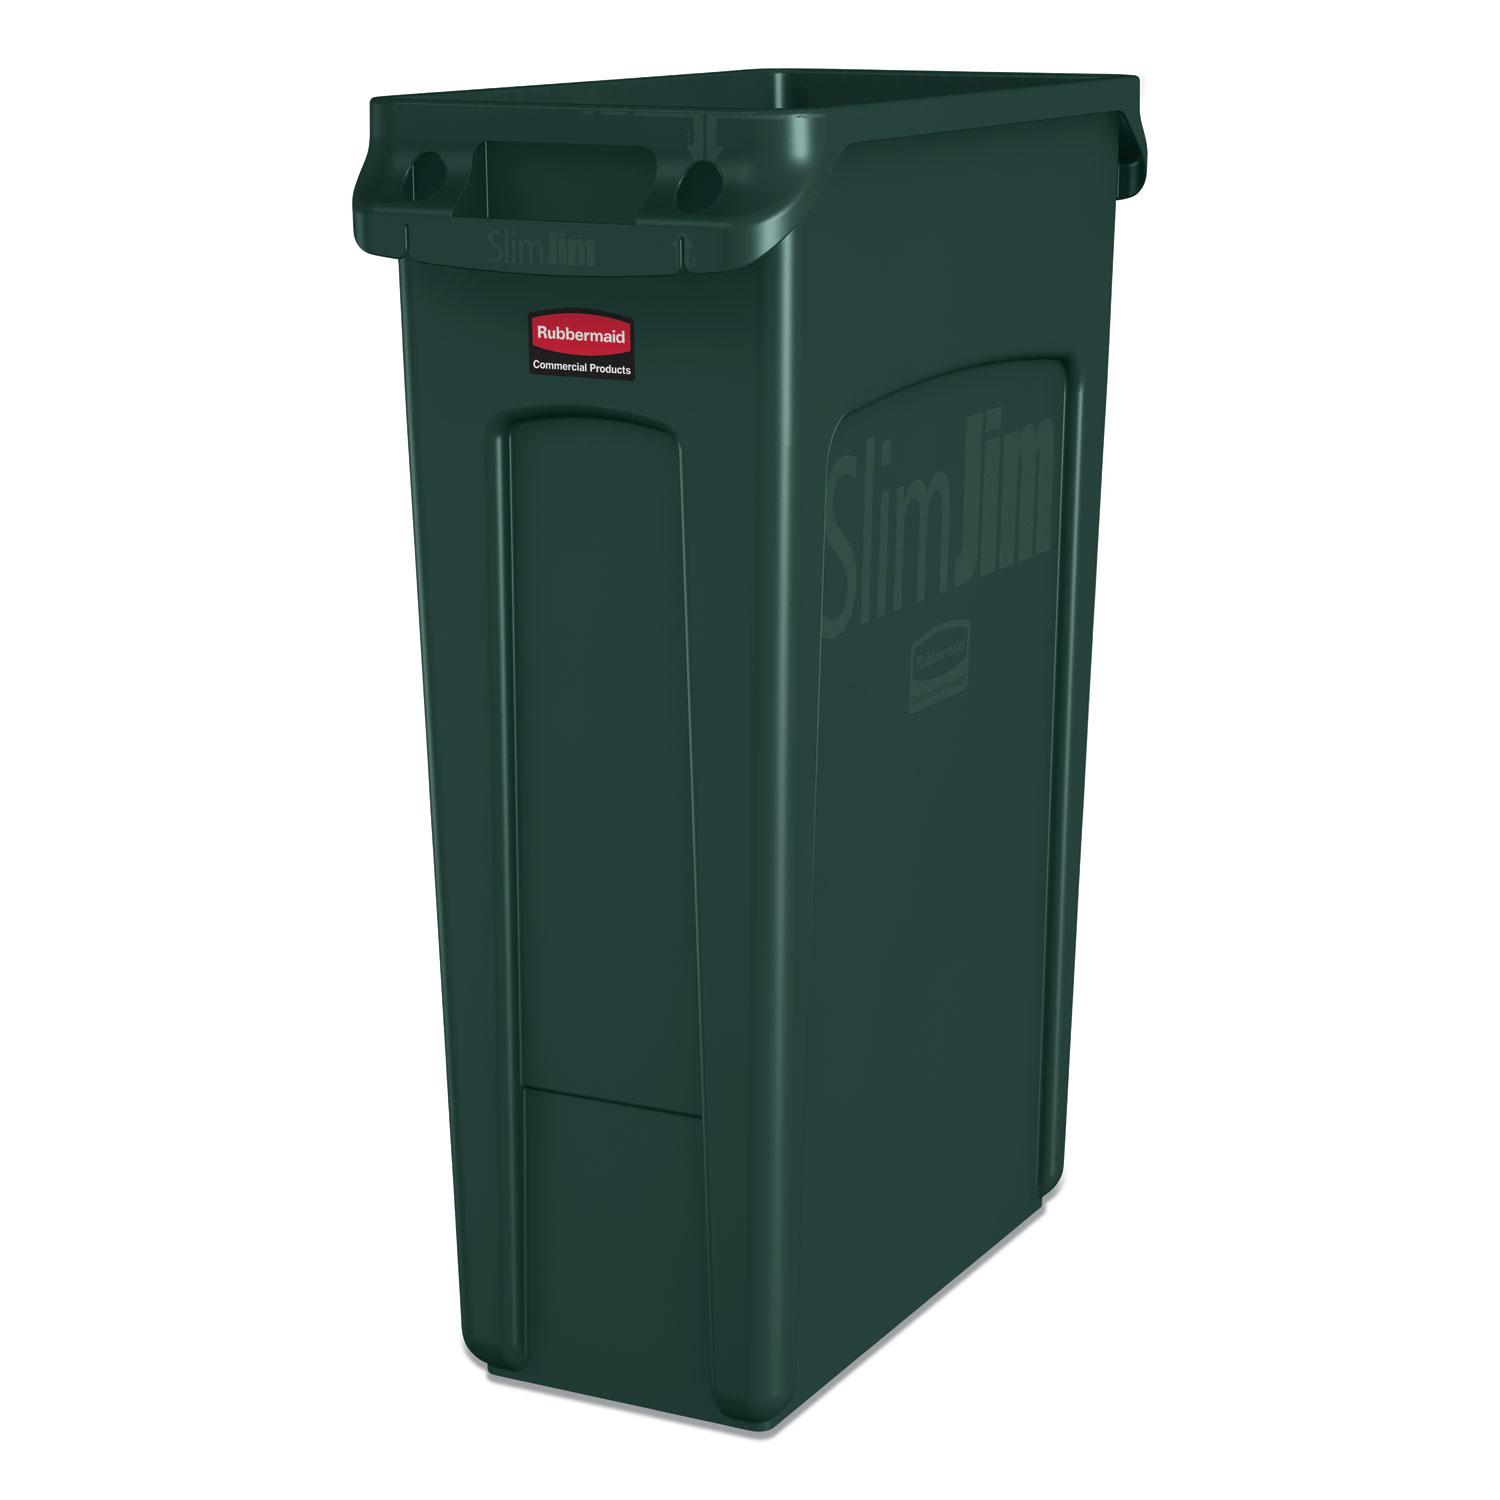 Rubbermaid® Commercial Slim Jim Receptacle with Venting Channels, Rectangular, Plastic, 23 gal, Dark Green